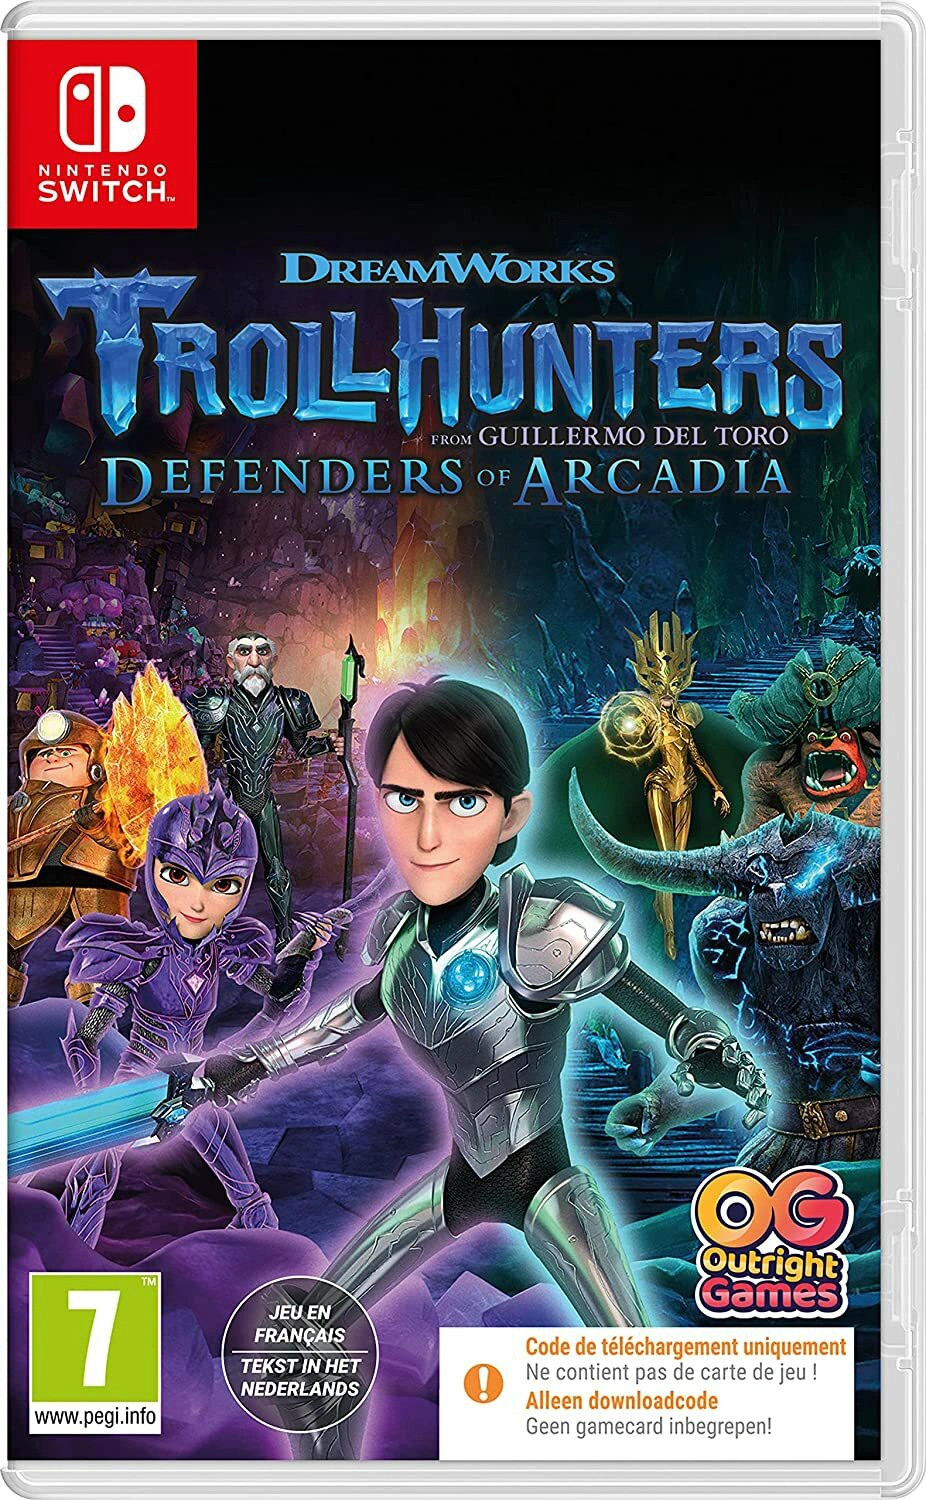 Trollhunters Defenders of Arcadia (code in a box) - Nintendo Switch